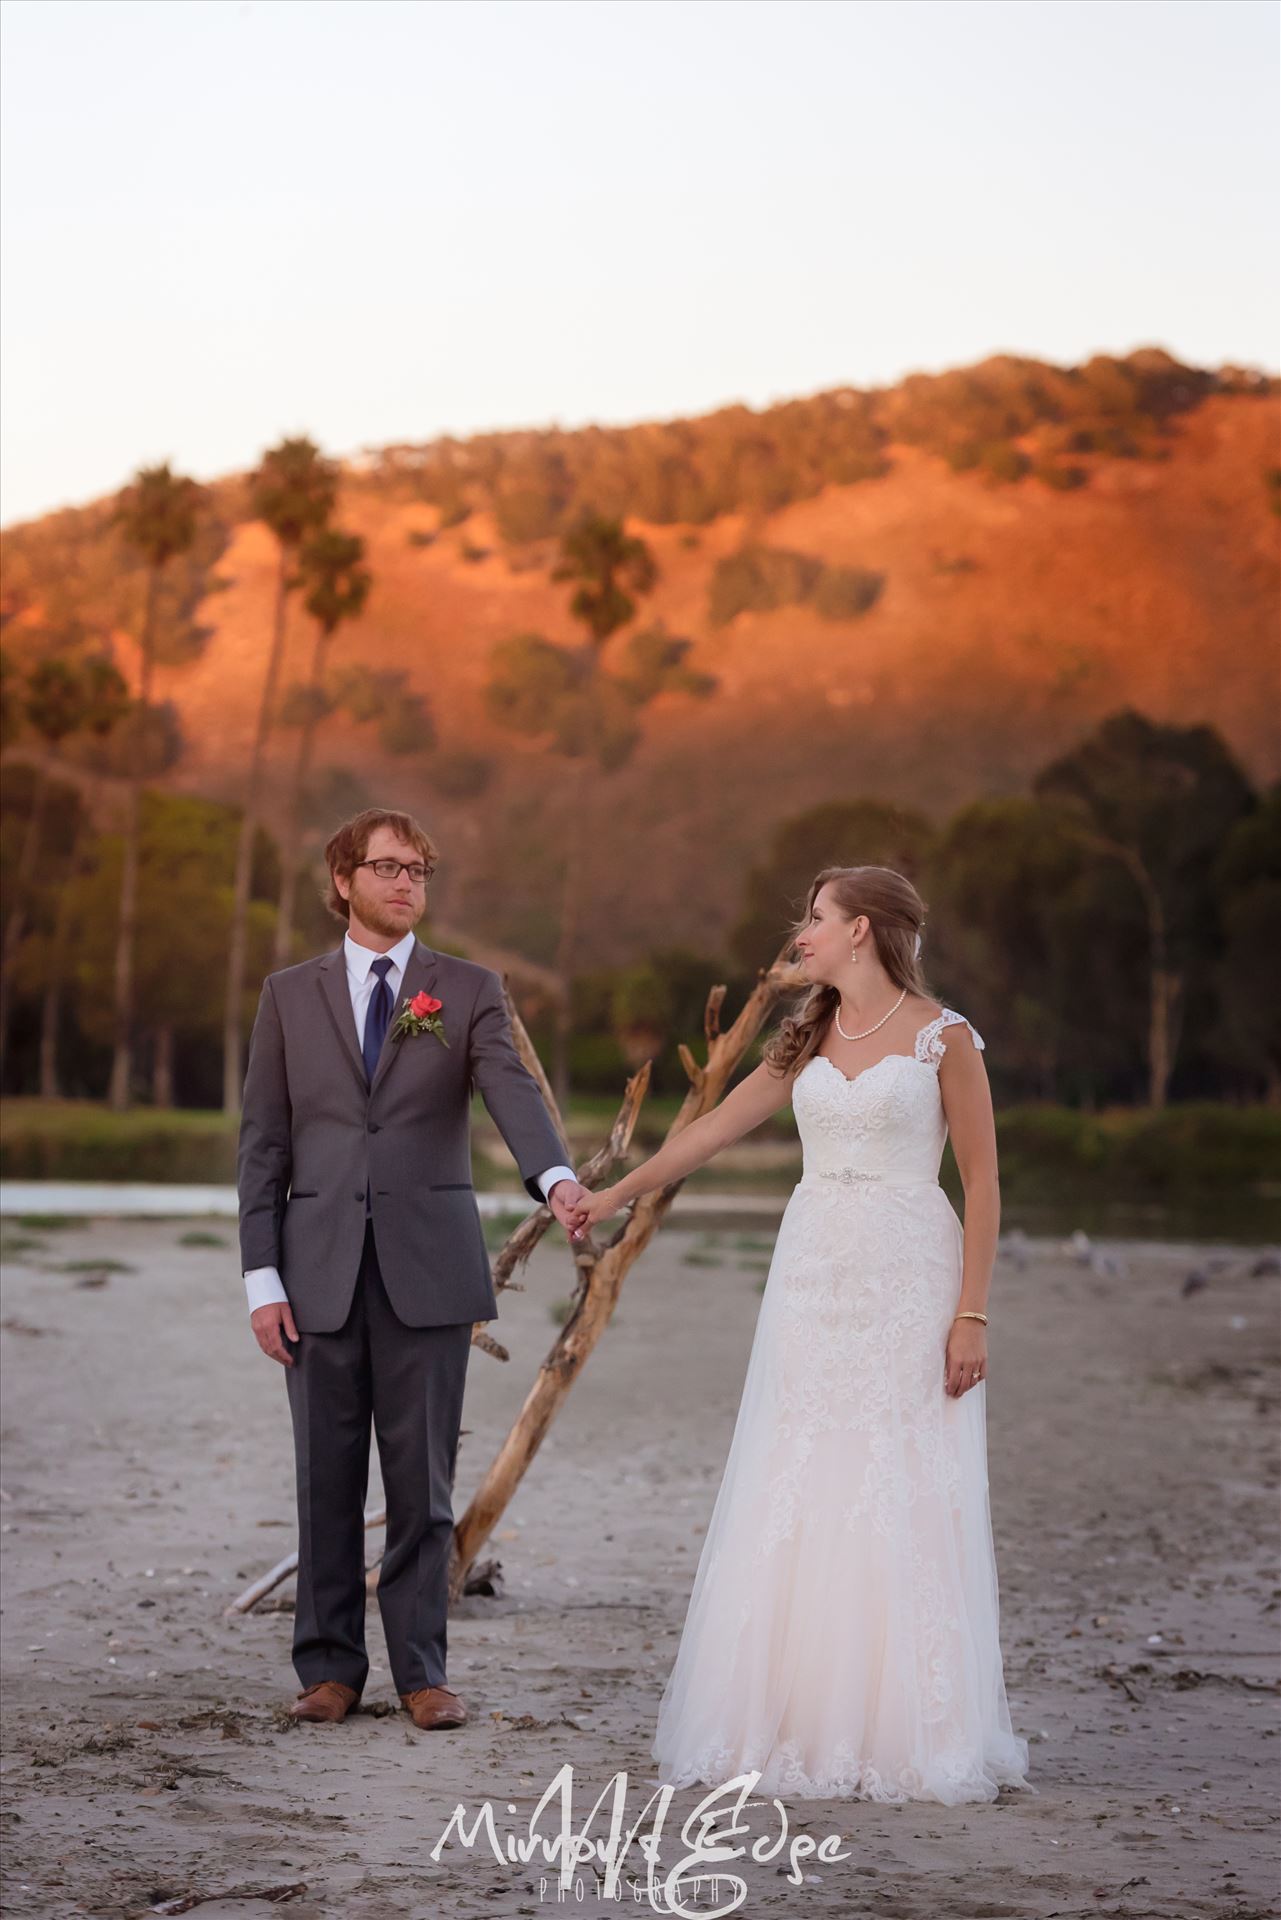 Port-7407.jpg Romantic and Modern with a Vintage Touch - Wedding Photography at the Avila Bay Golf Resort in Avila Beach, California by Sarah Williams